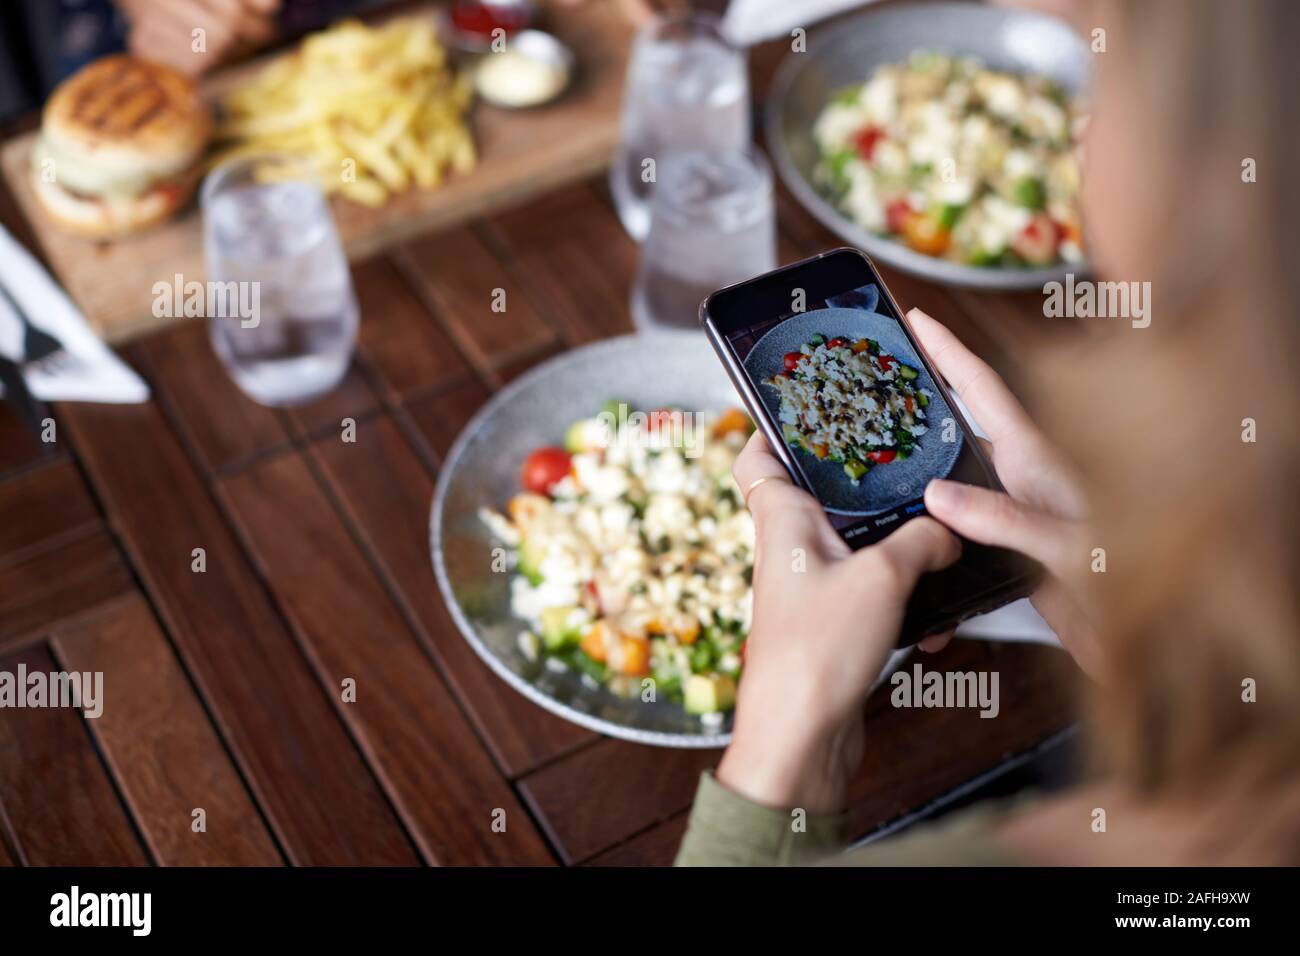 Female Friends In Restaurant Taking Picture Of Food In Restaurant To Post On Social Media Stock Photo